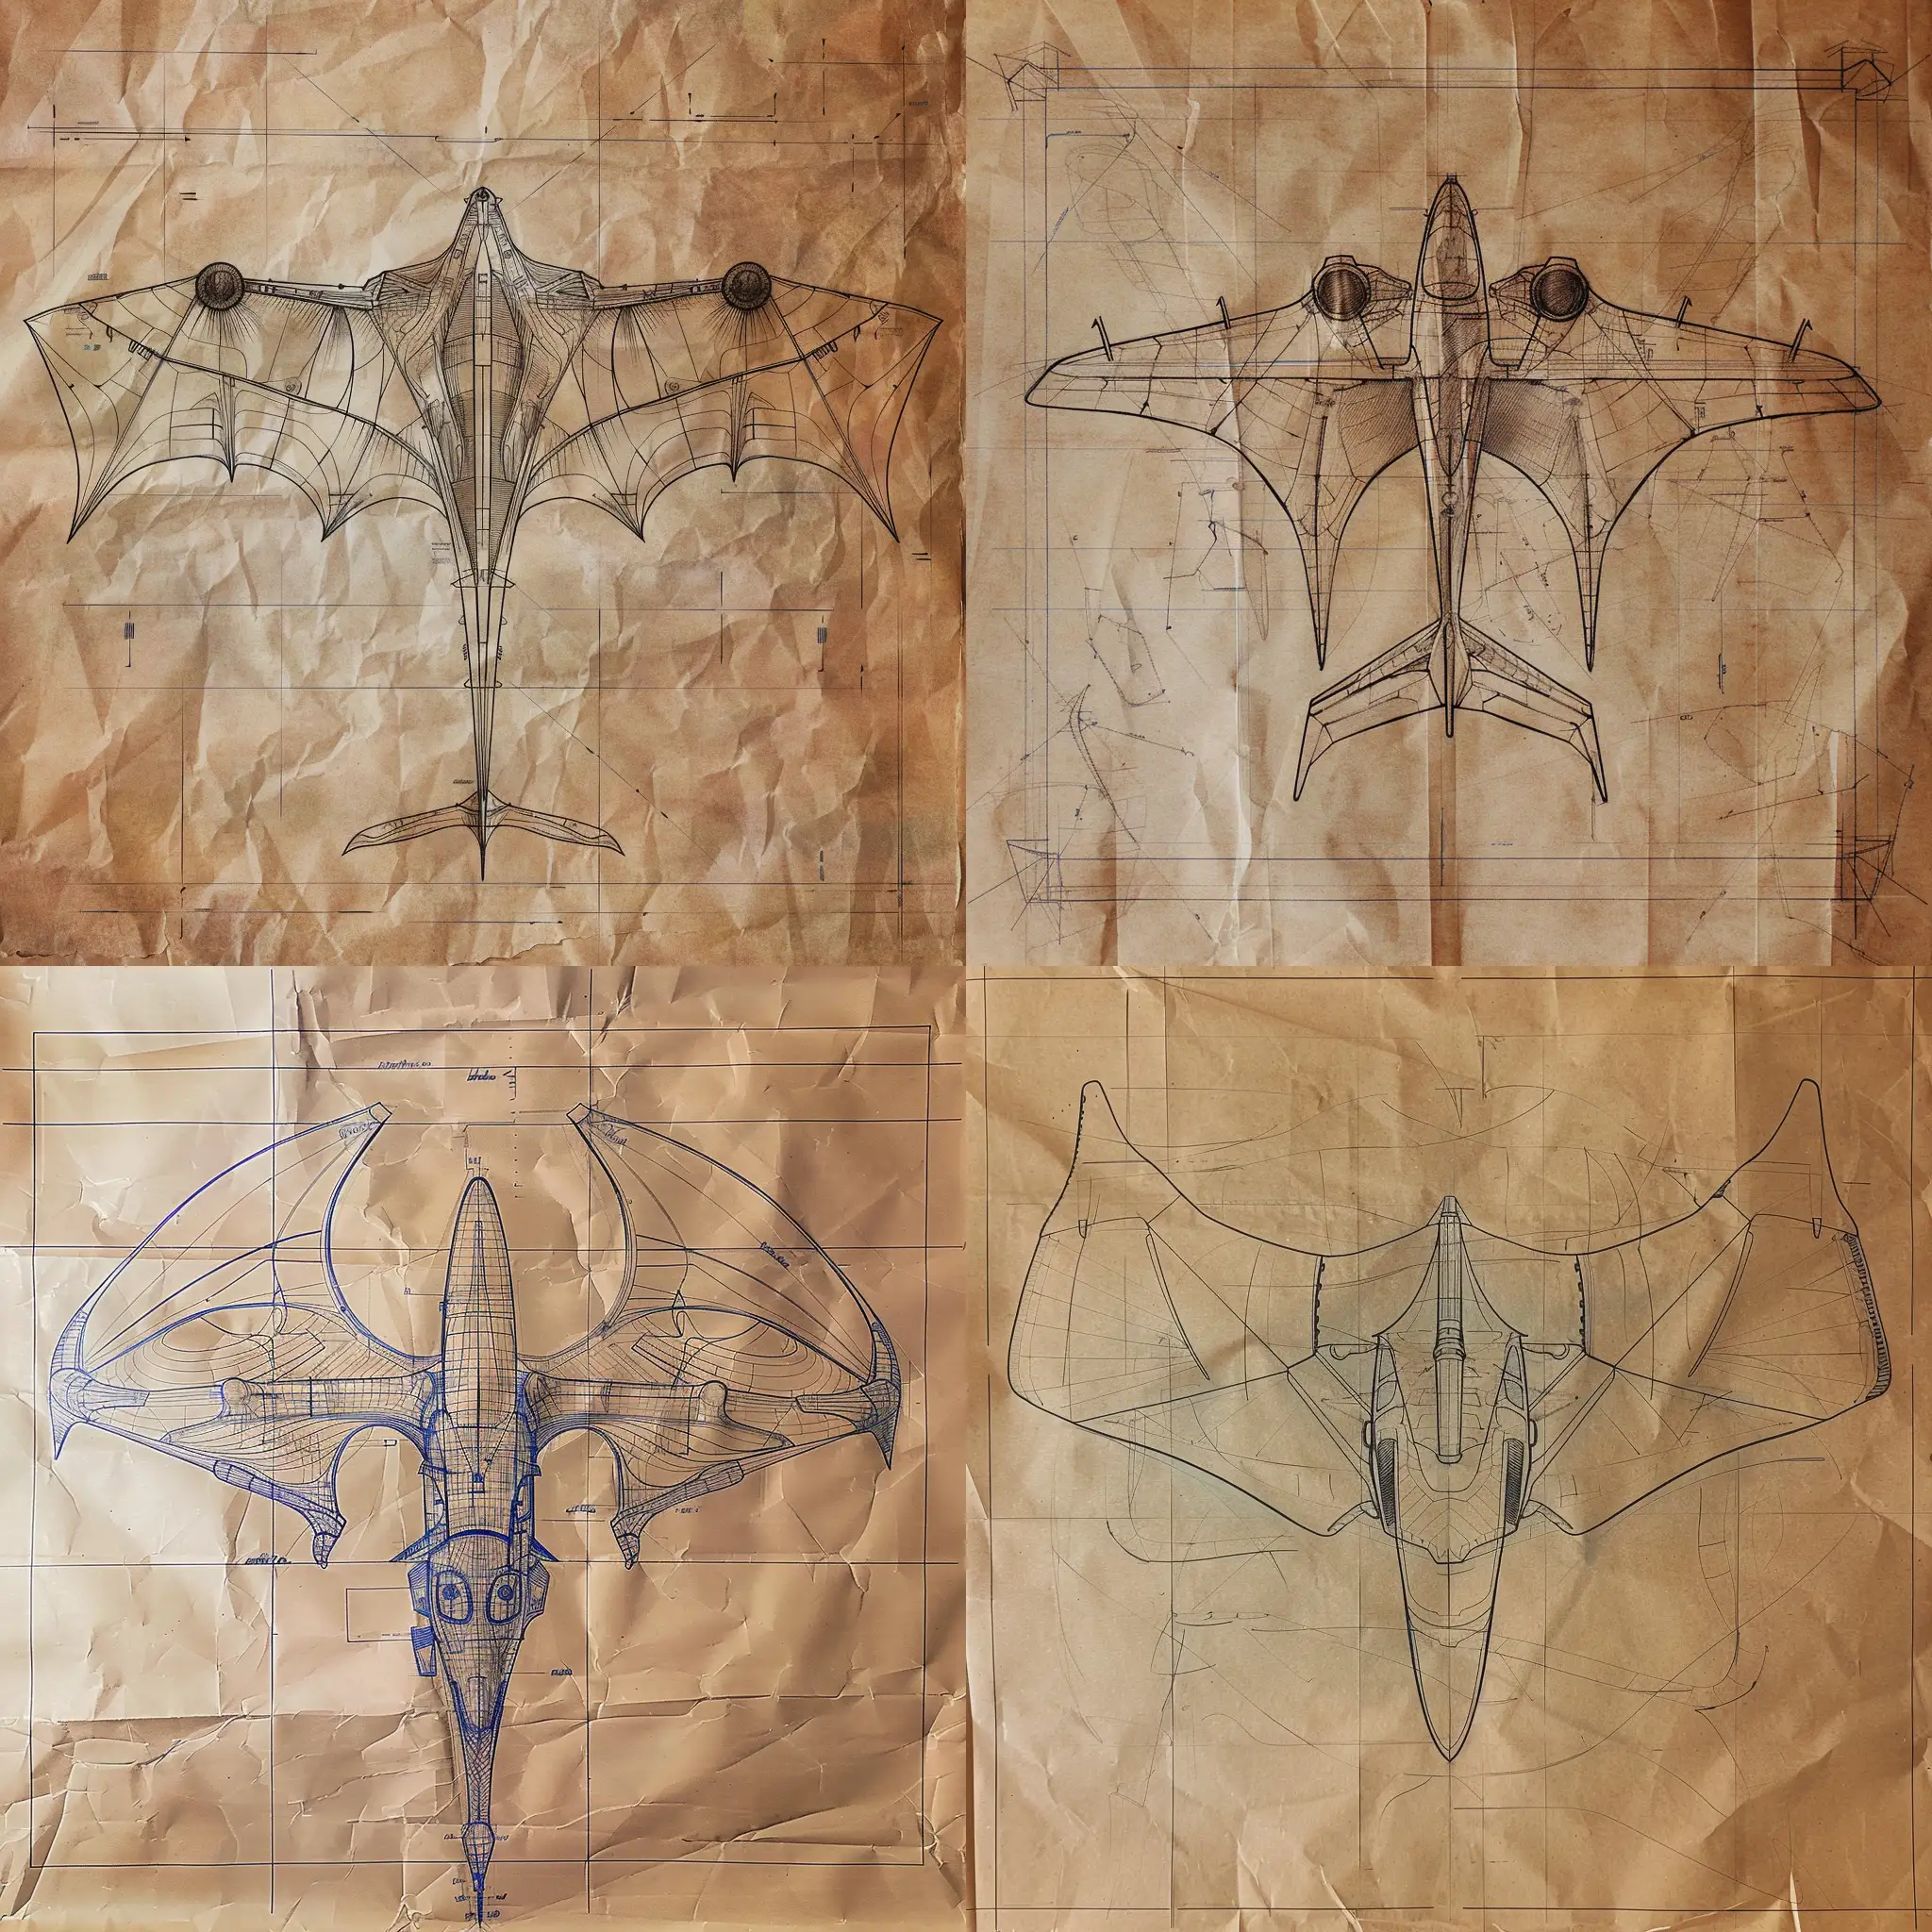 futuristic aeroplane with vibrating wings like a dragon fly. Blueprint. Indian ink on brown paper.